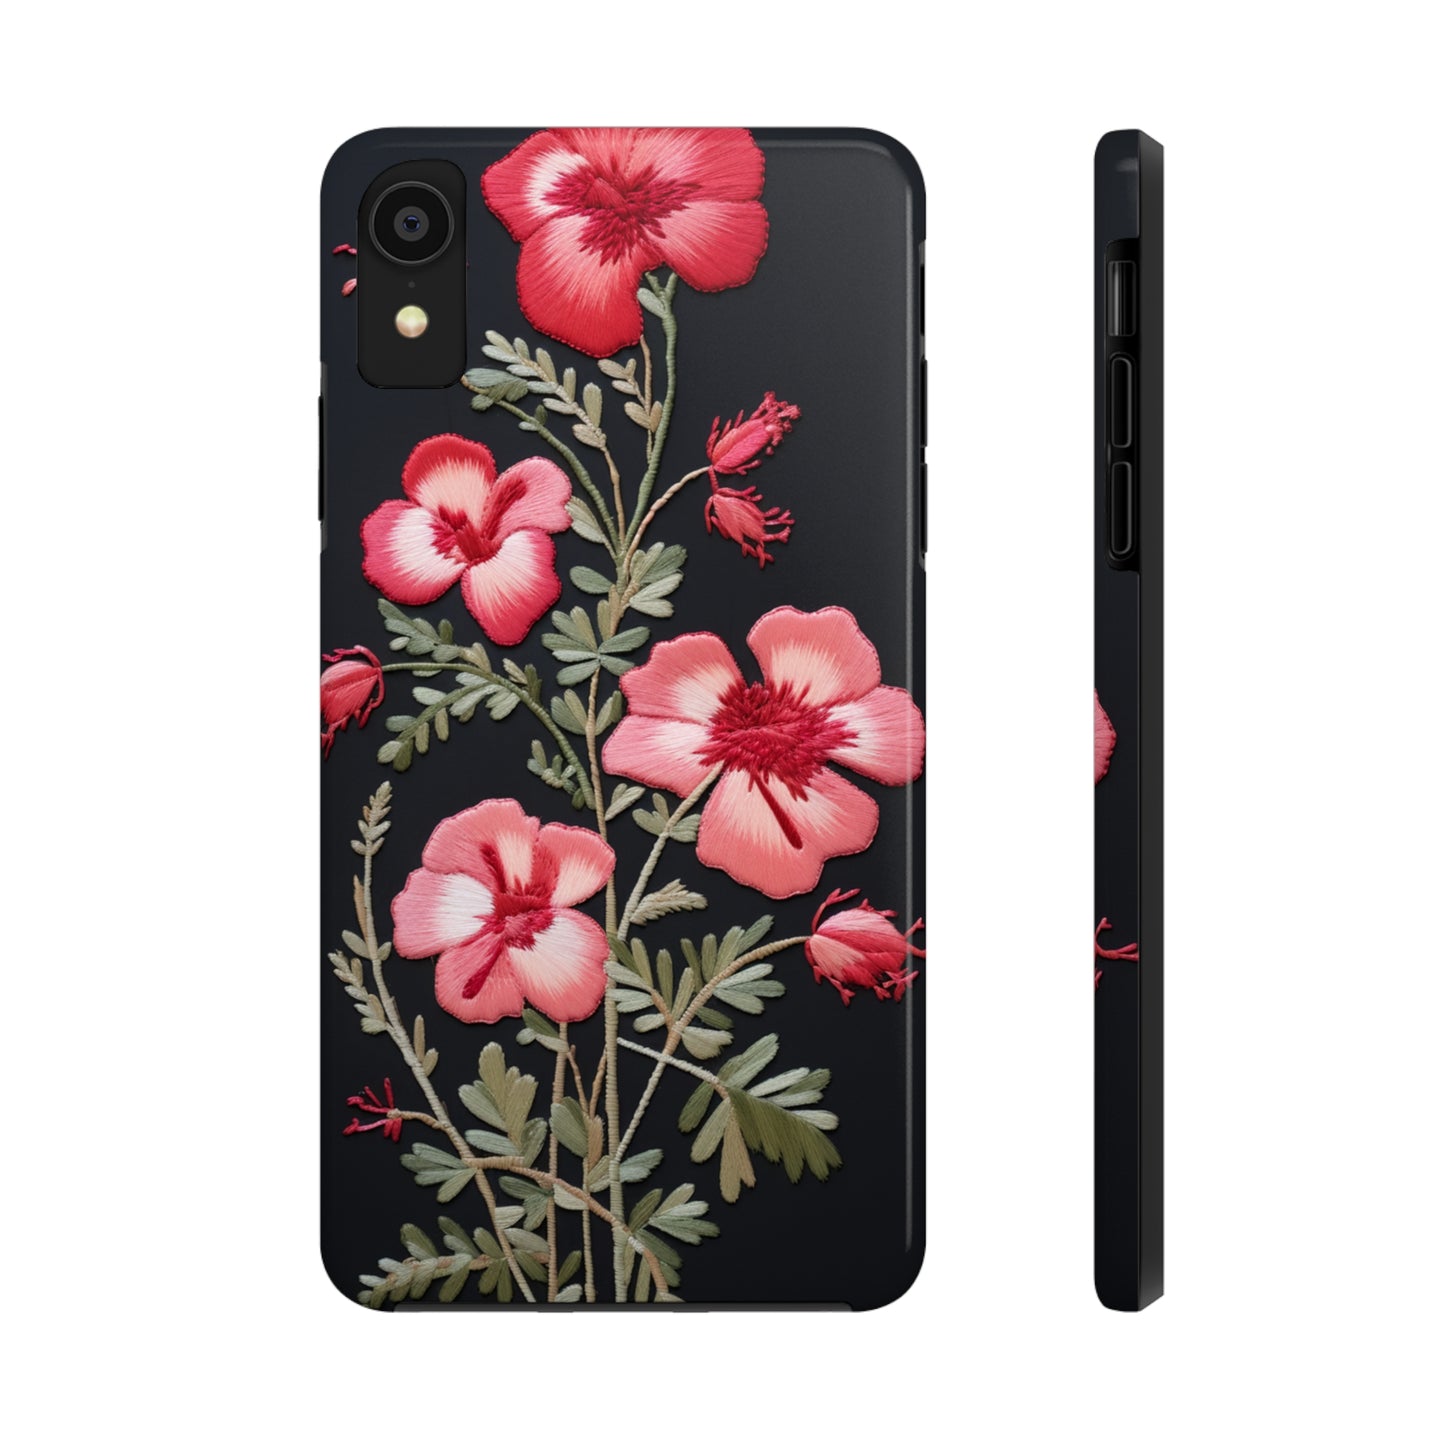 New Floral Embroidery iPhone Case